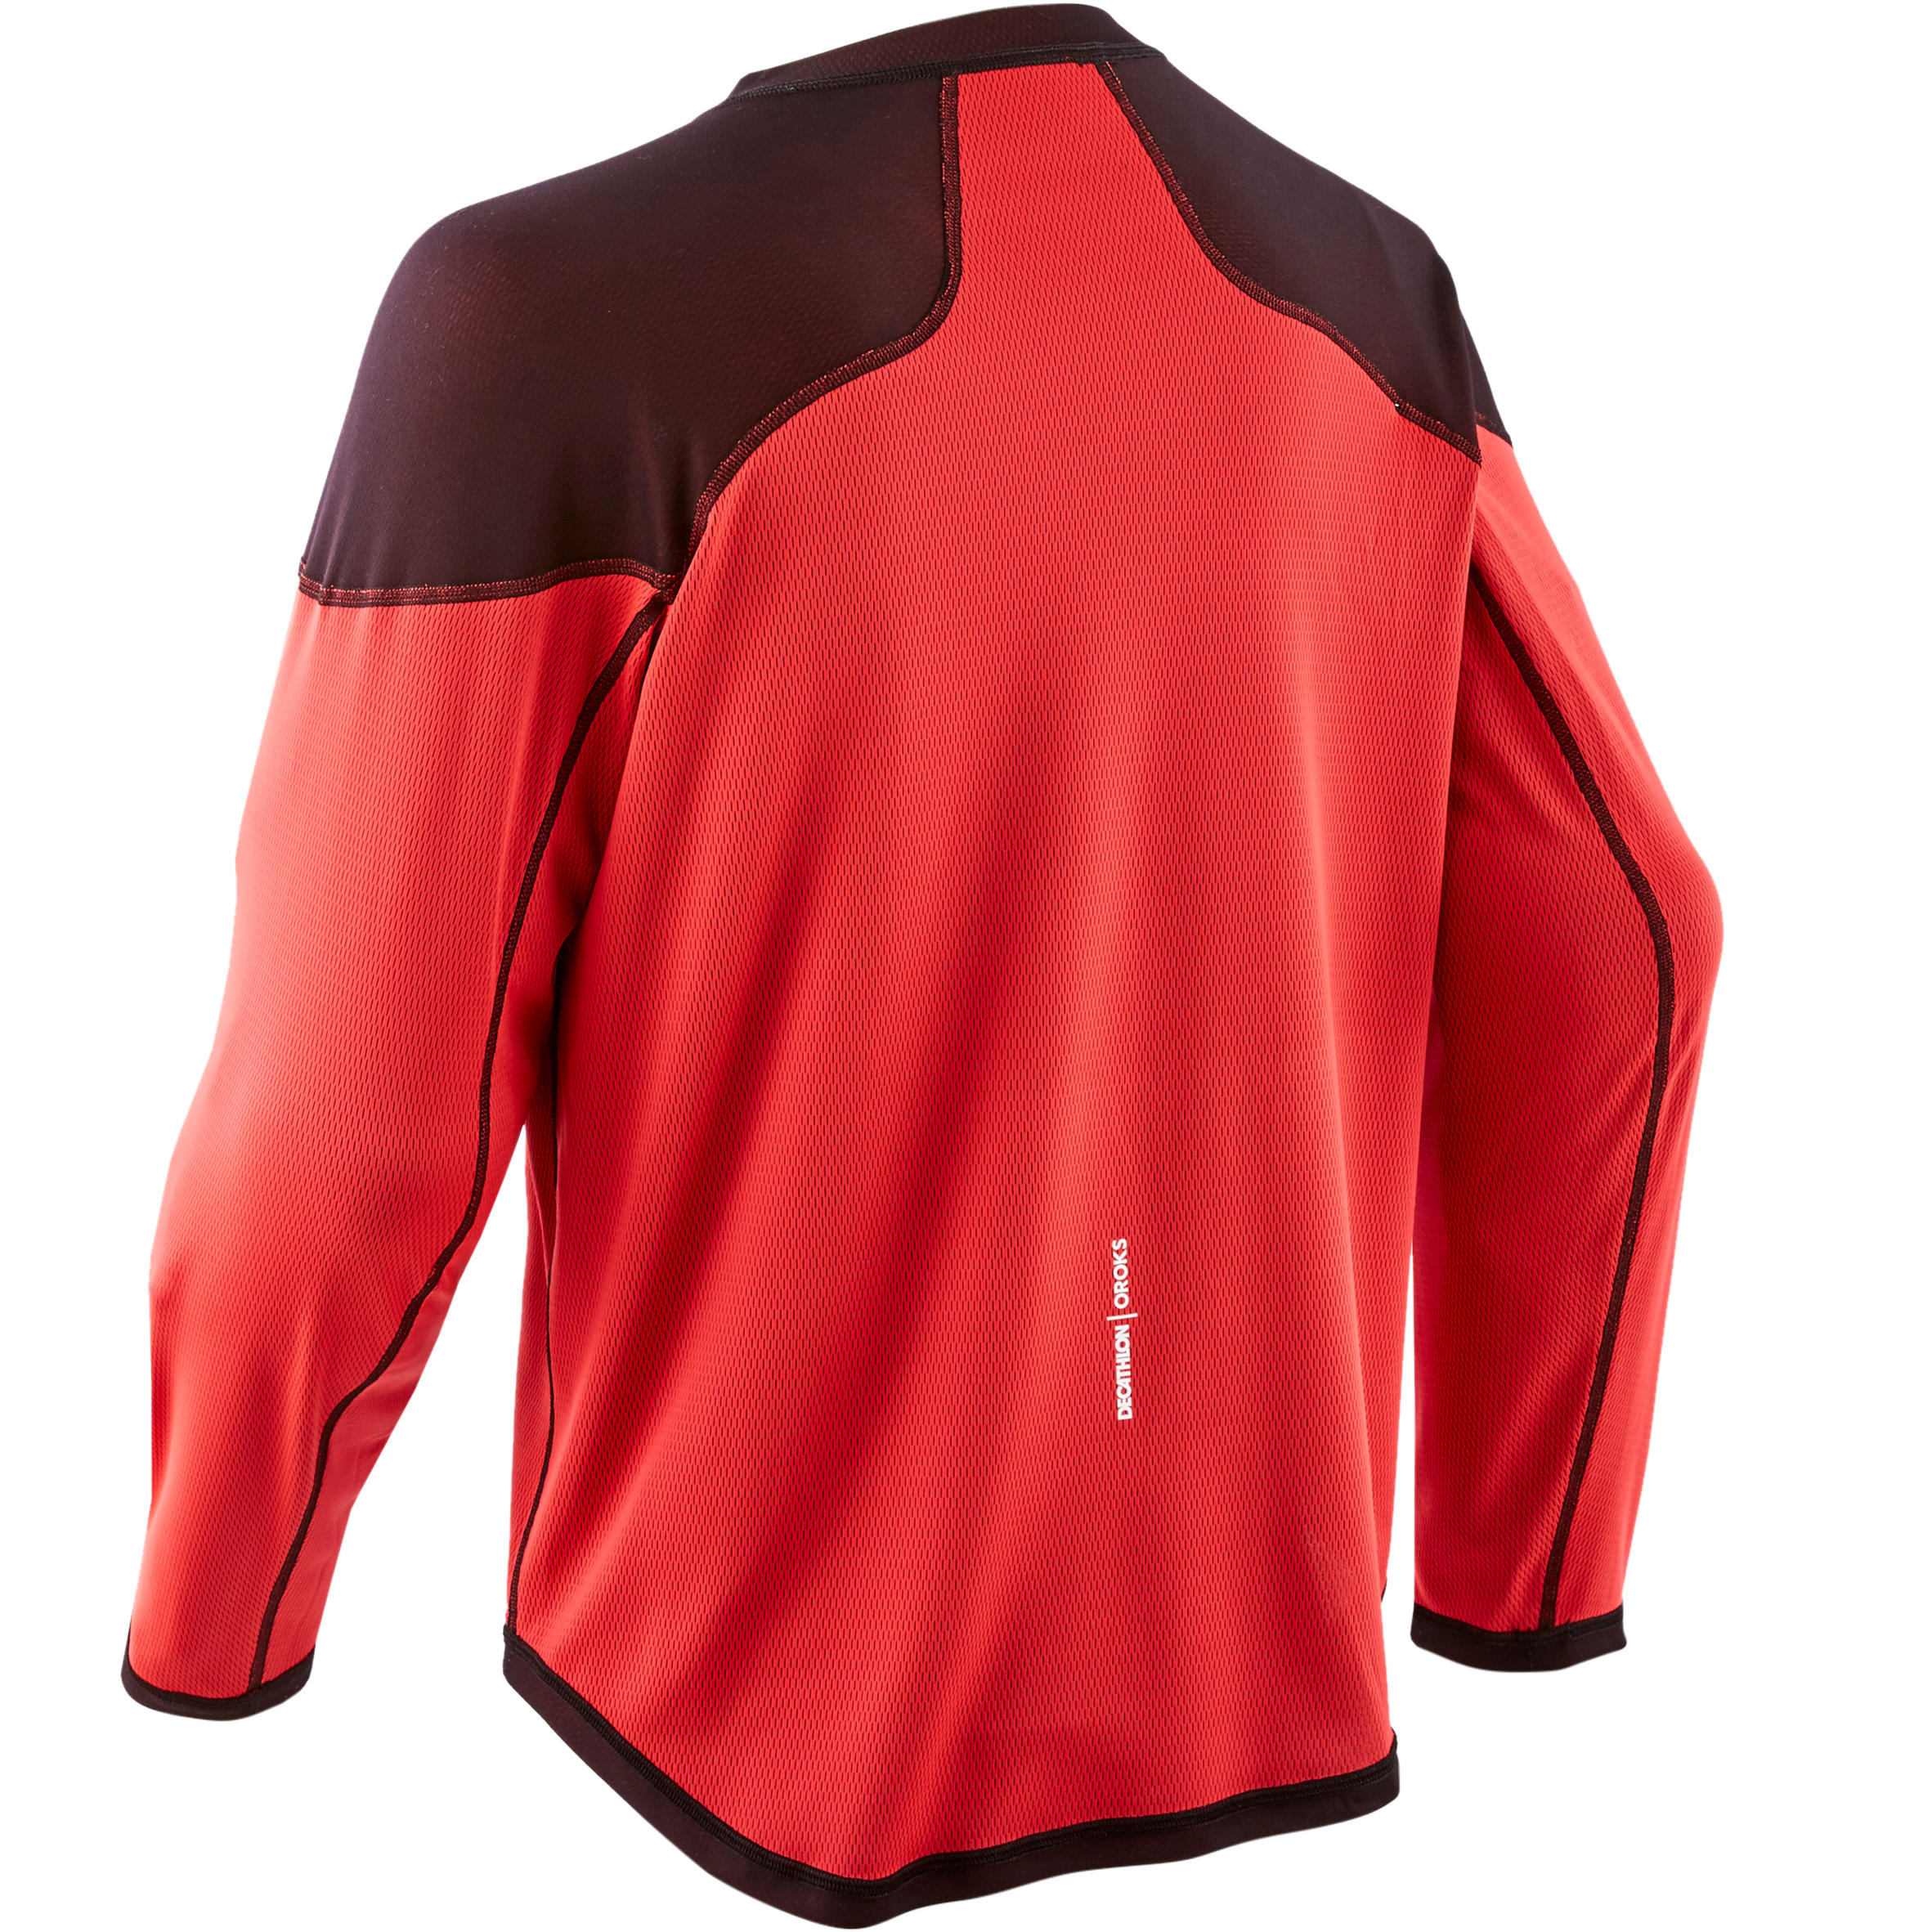 Adult Training Jersey ILH 500 - Black/Red 2/4